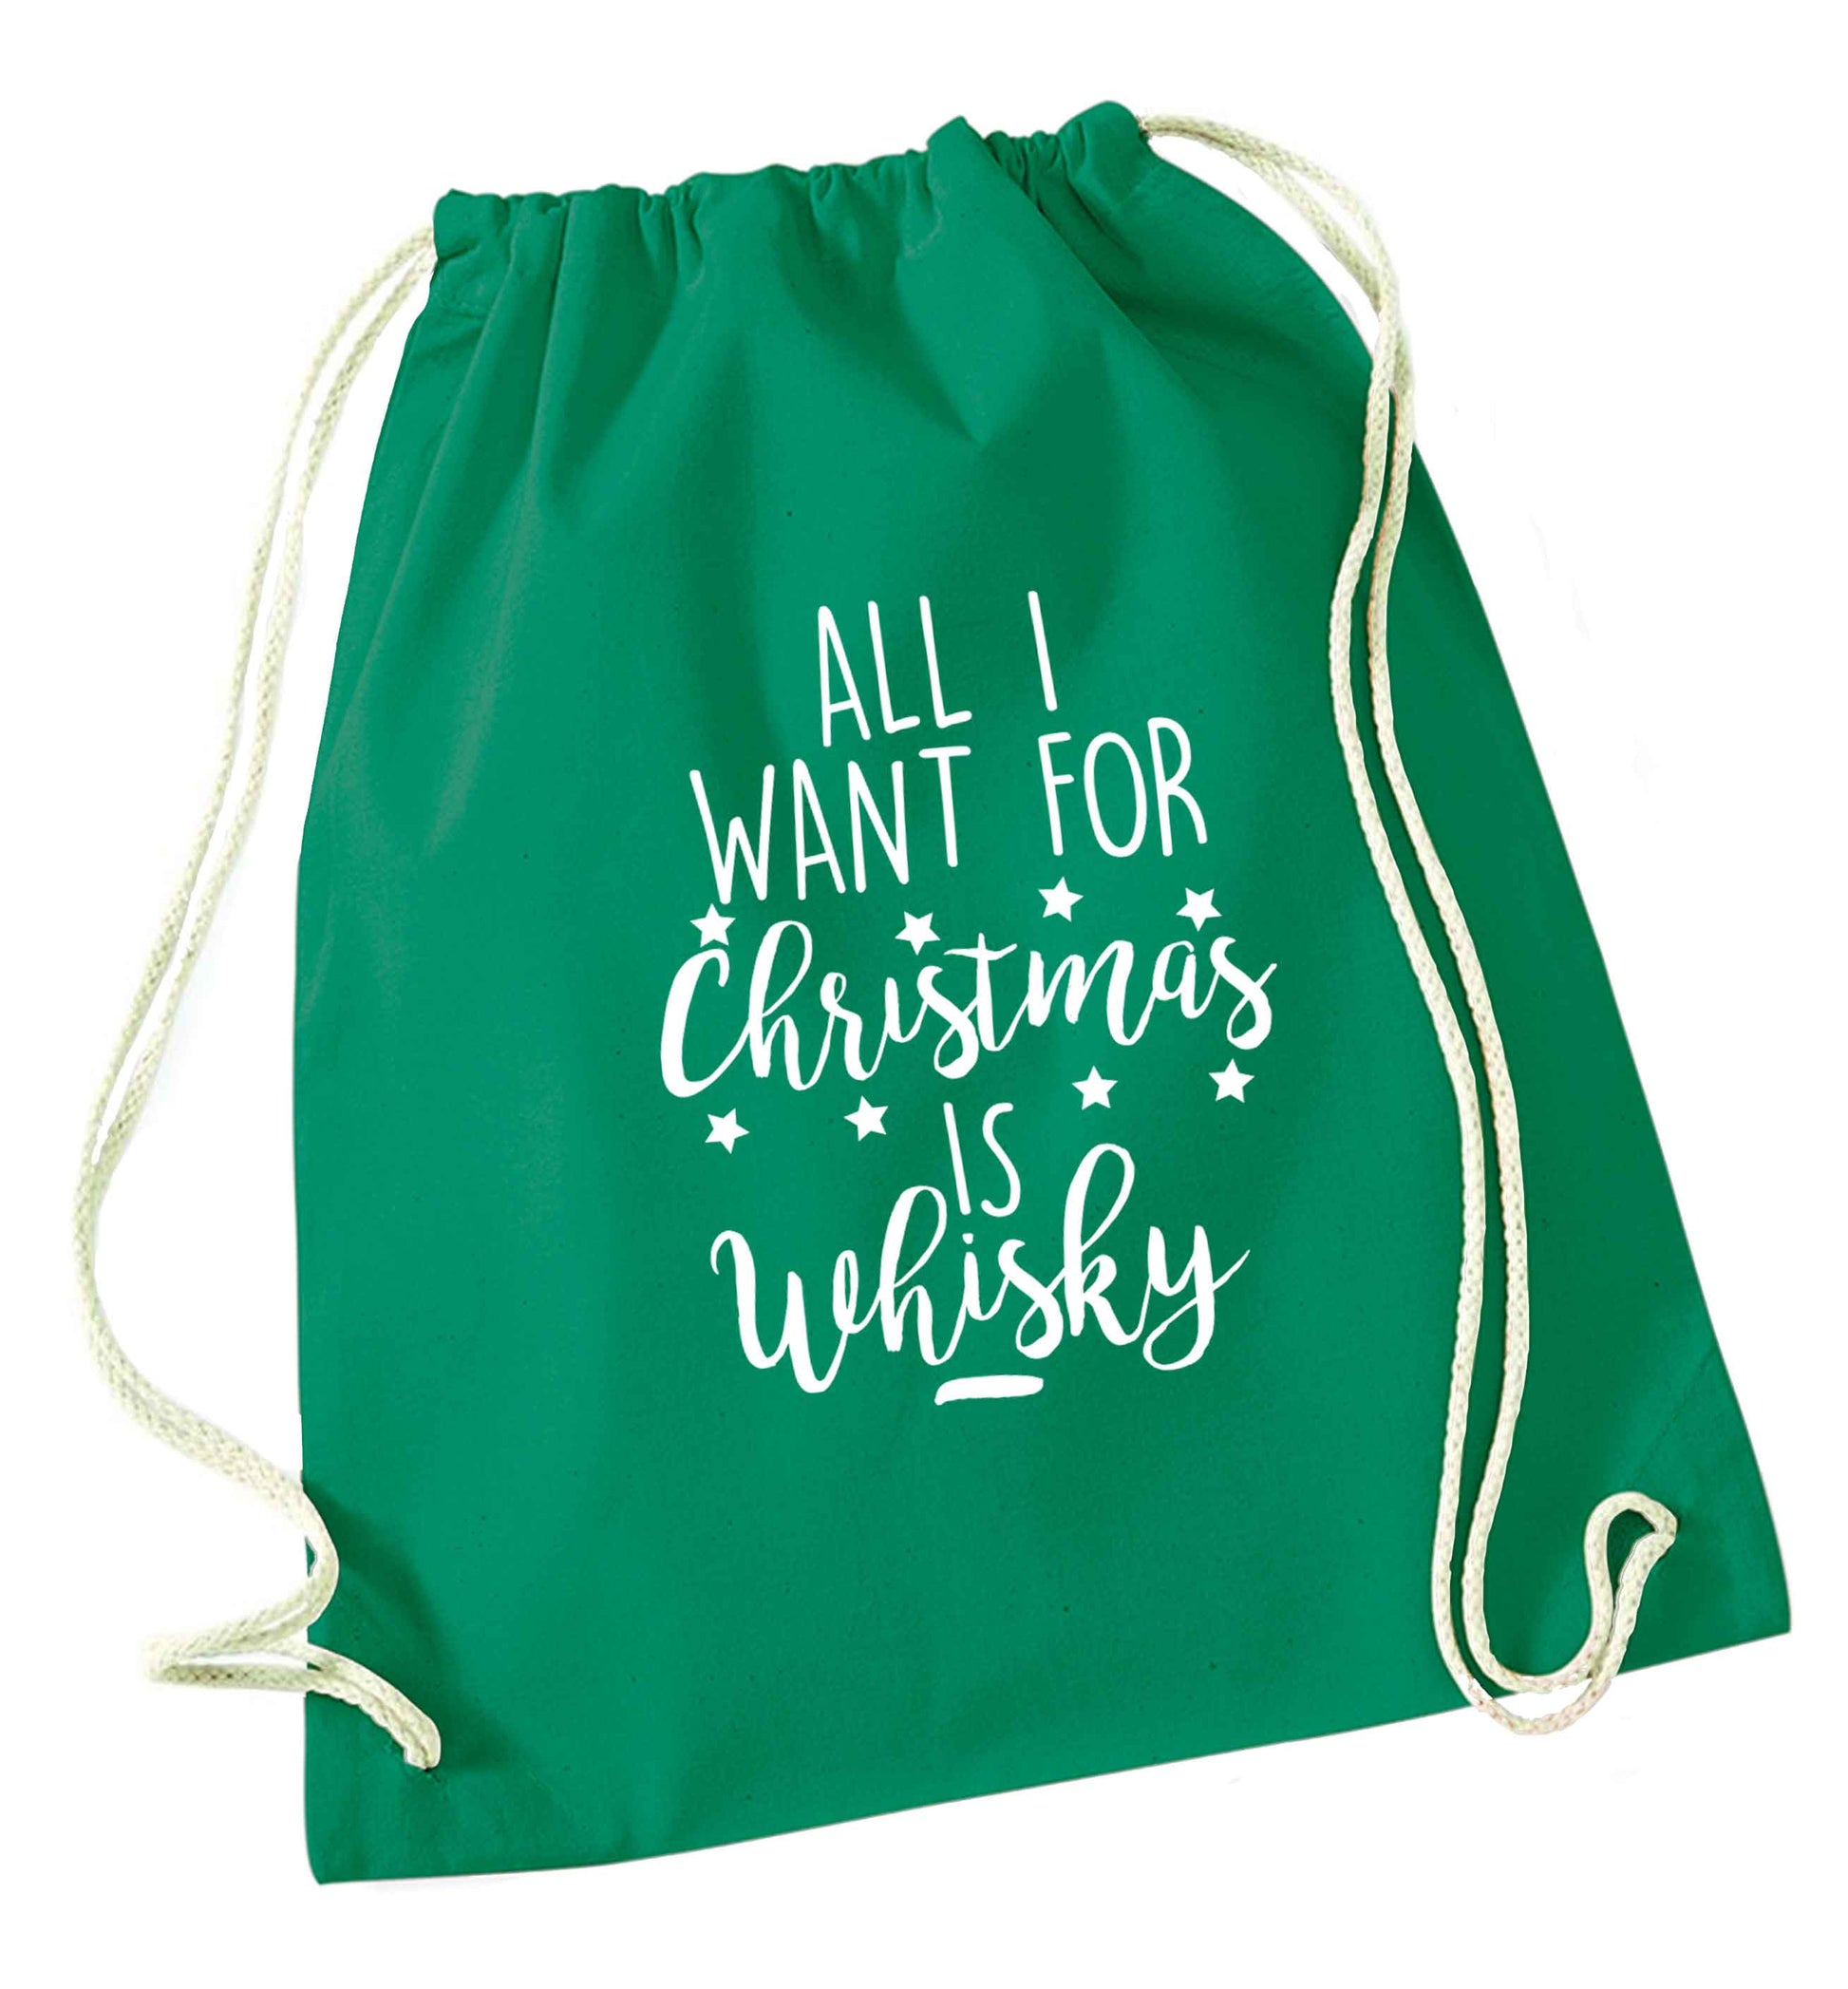 All I want for Christmas is whisky green drawstring bag